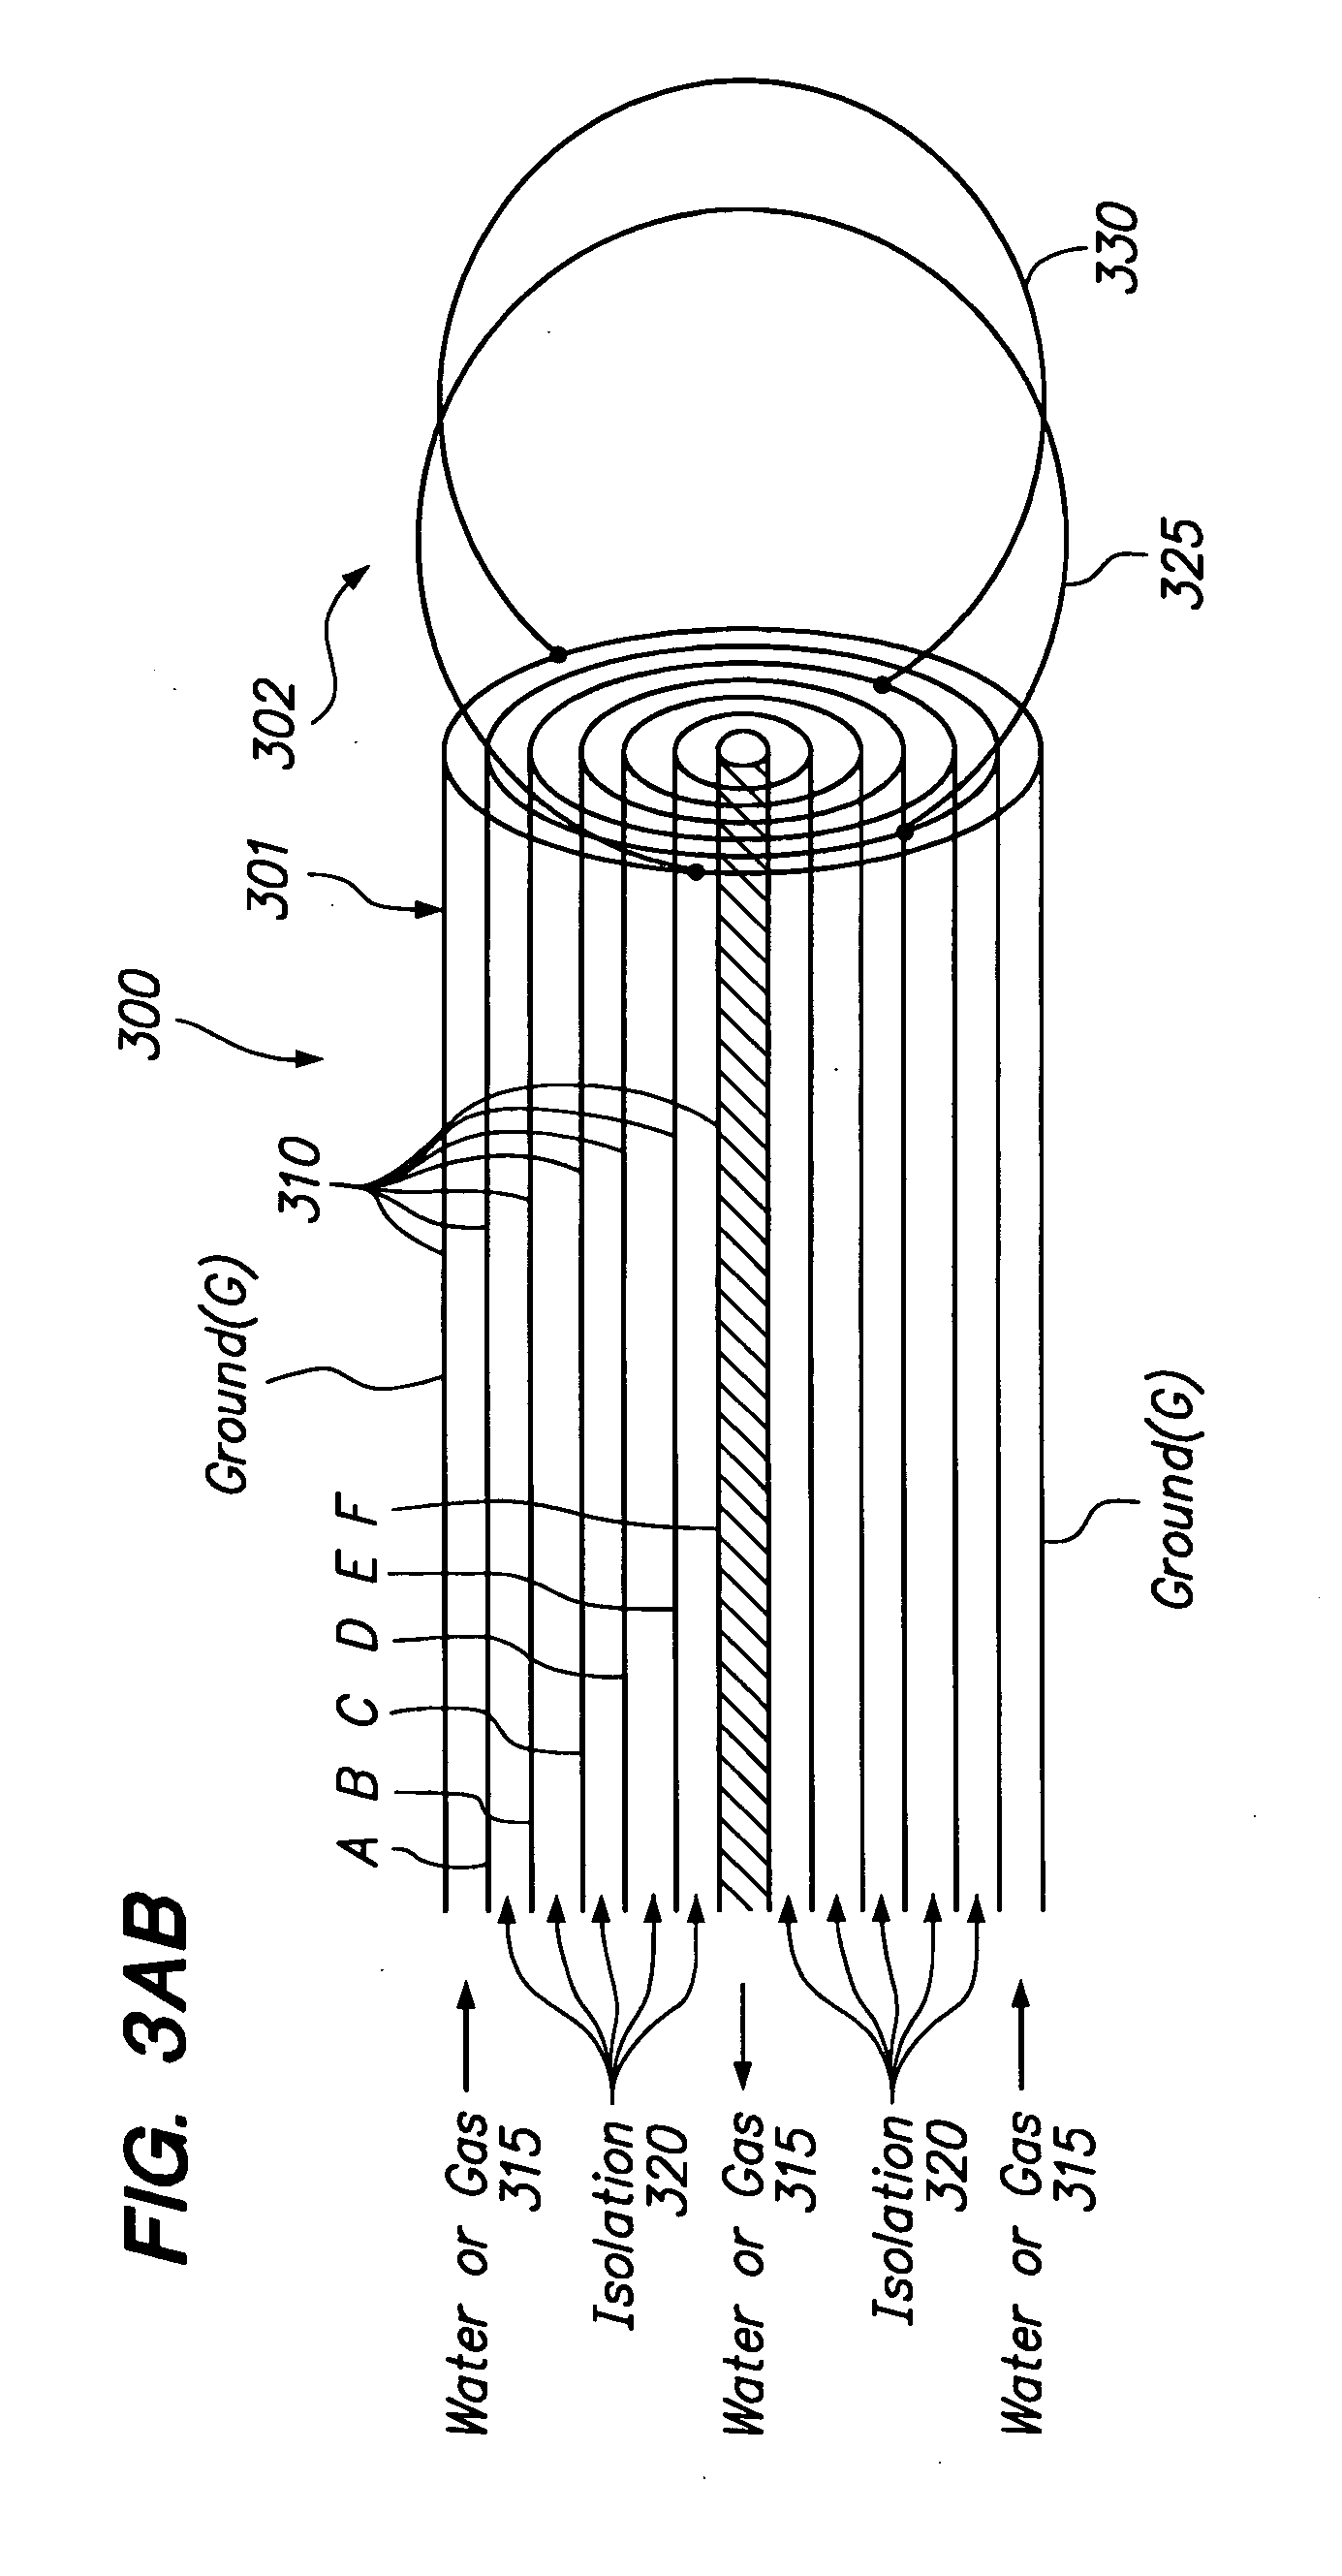 System and method of interferentially varying electromagnetic near field patterns